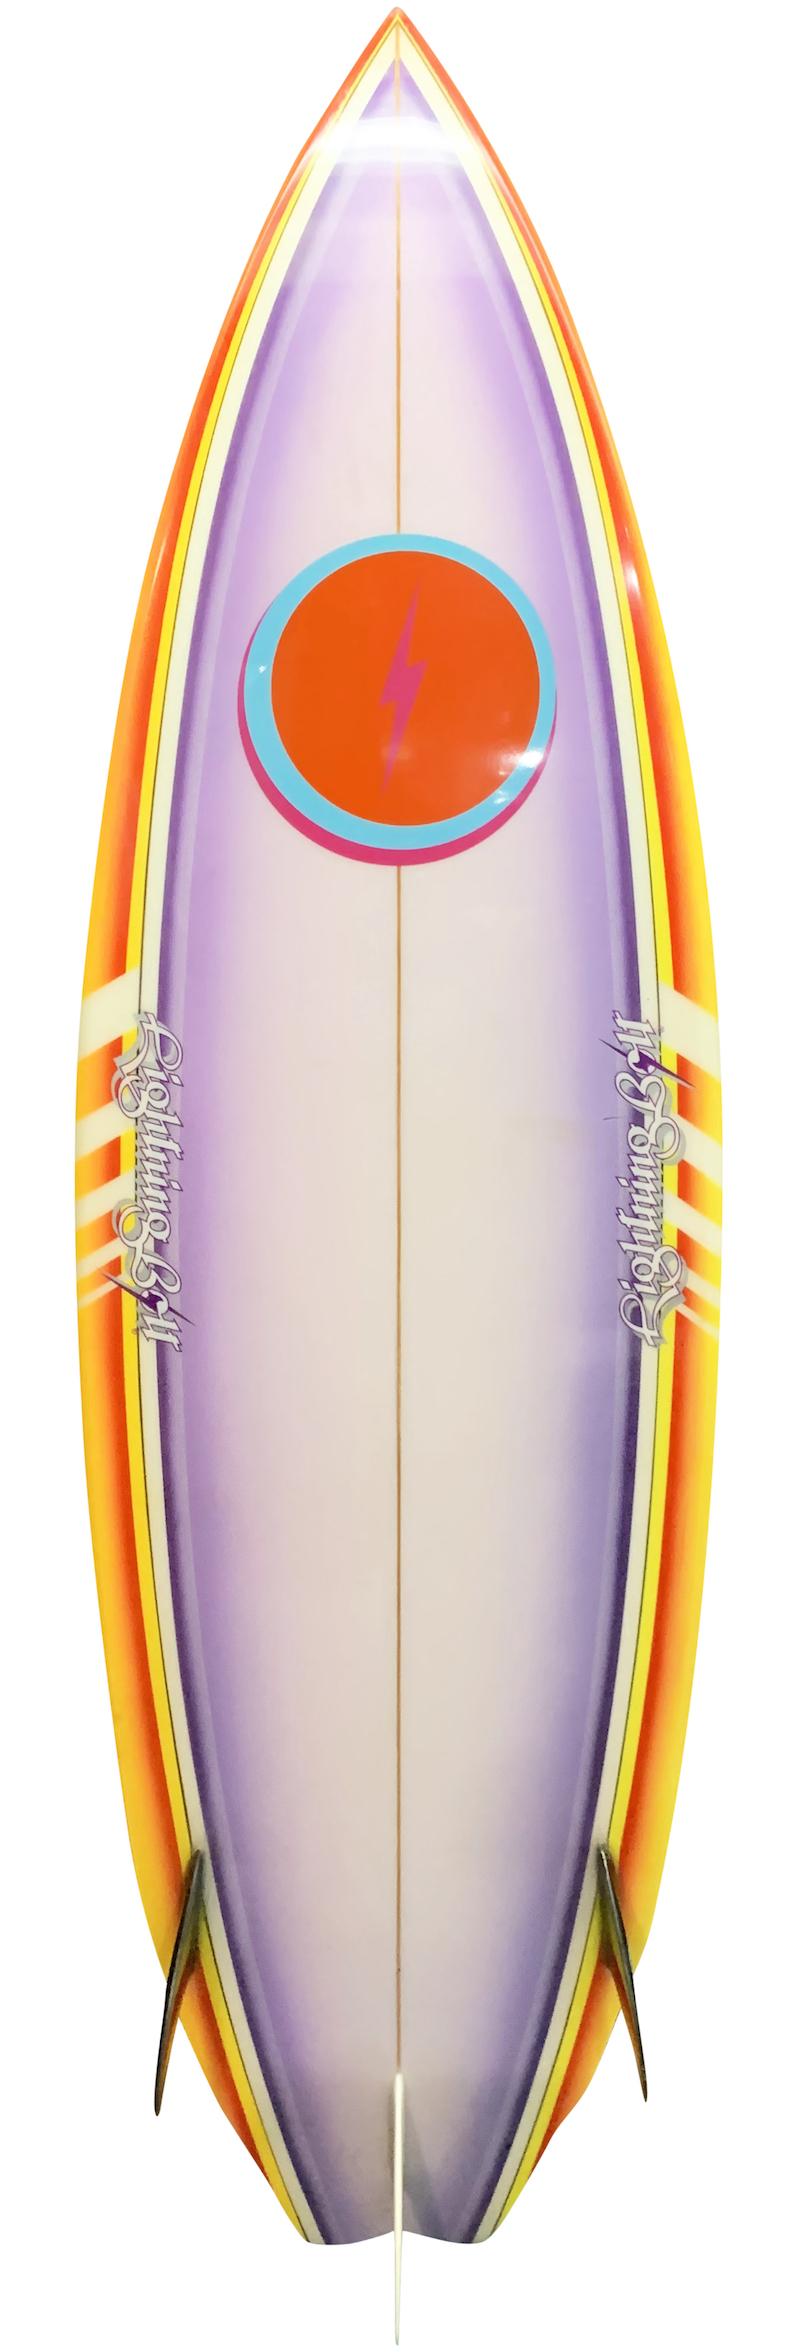 Early-mid 1980's Vintage Lightning Bolt Rory Russell model shaped by Tom Eberly. Featuring a vibrant 80's era airbrush with thruster (tri-fin) setup. Restored to original condition. 

In 1972, Gerry Lopez and Jack Shipley started the popular